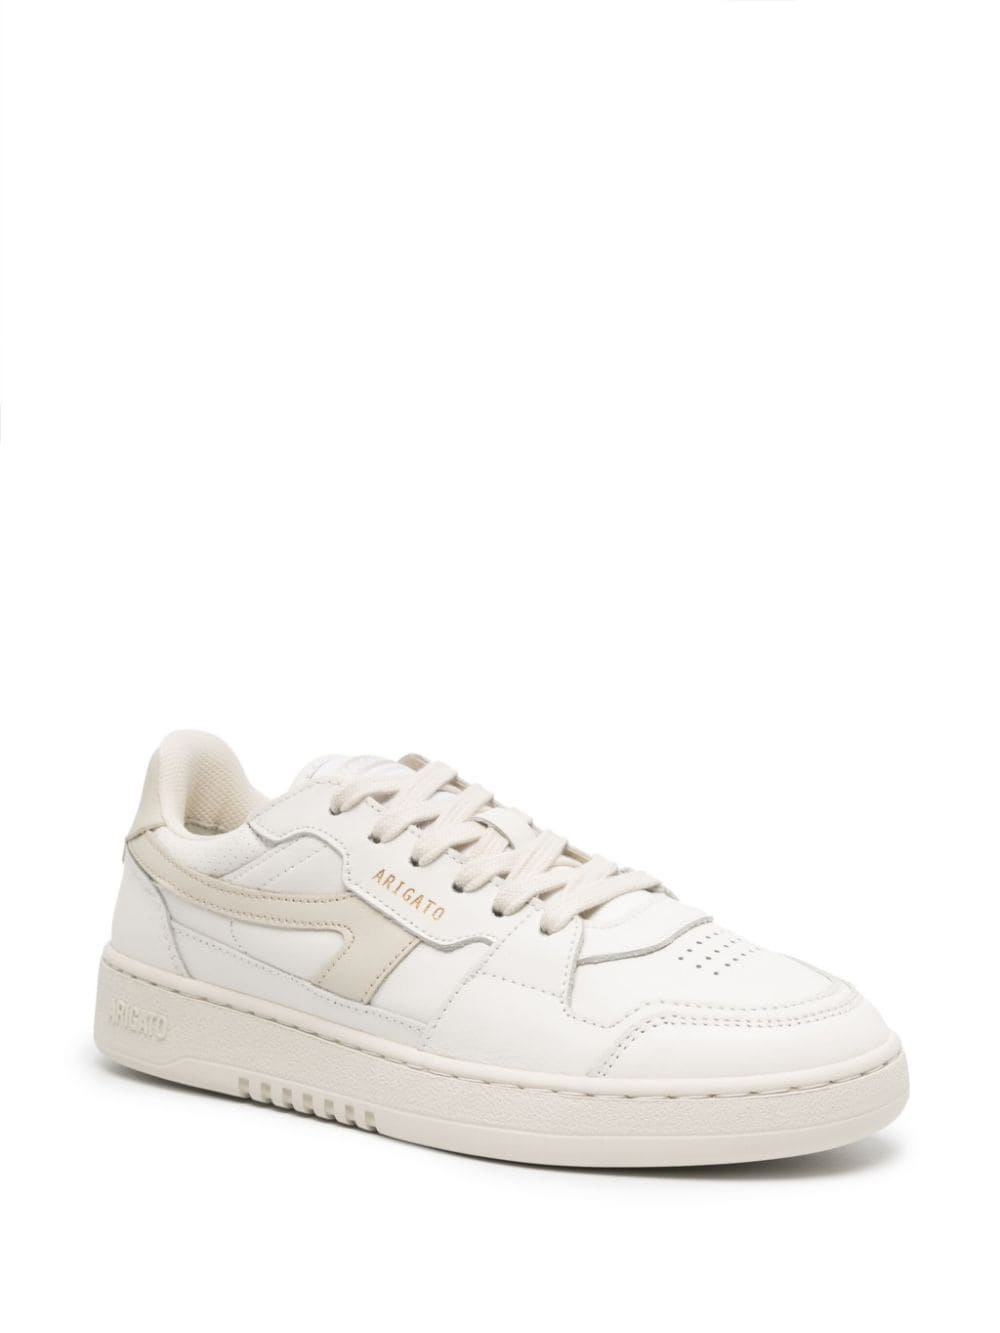 Dice-A leather sneakers - 2